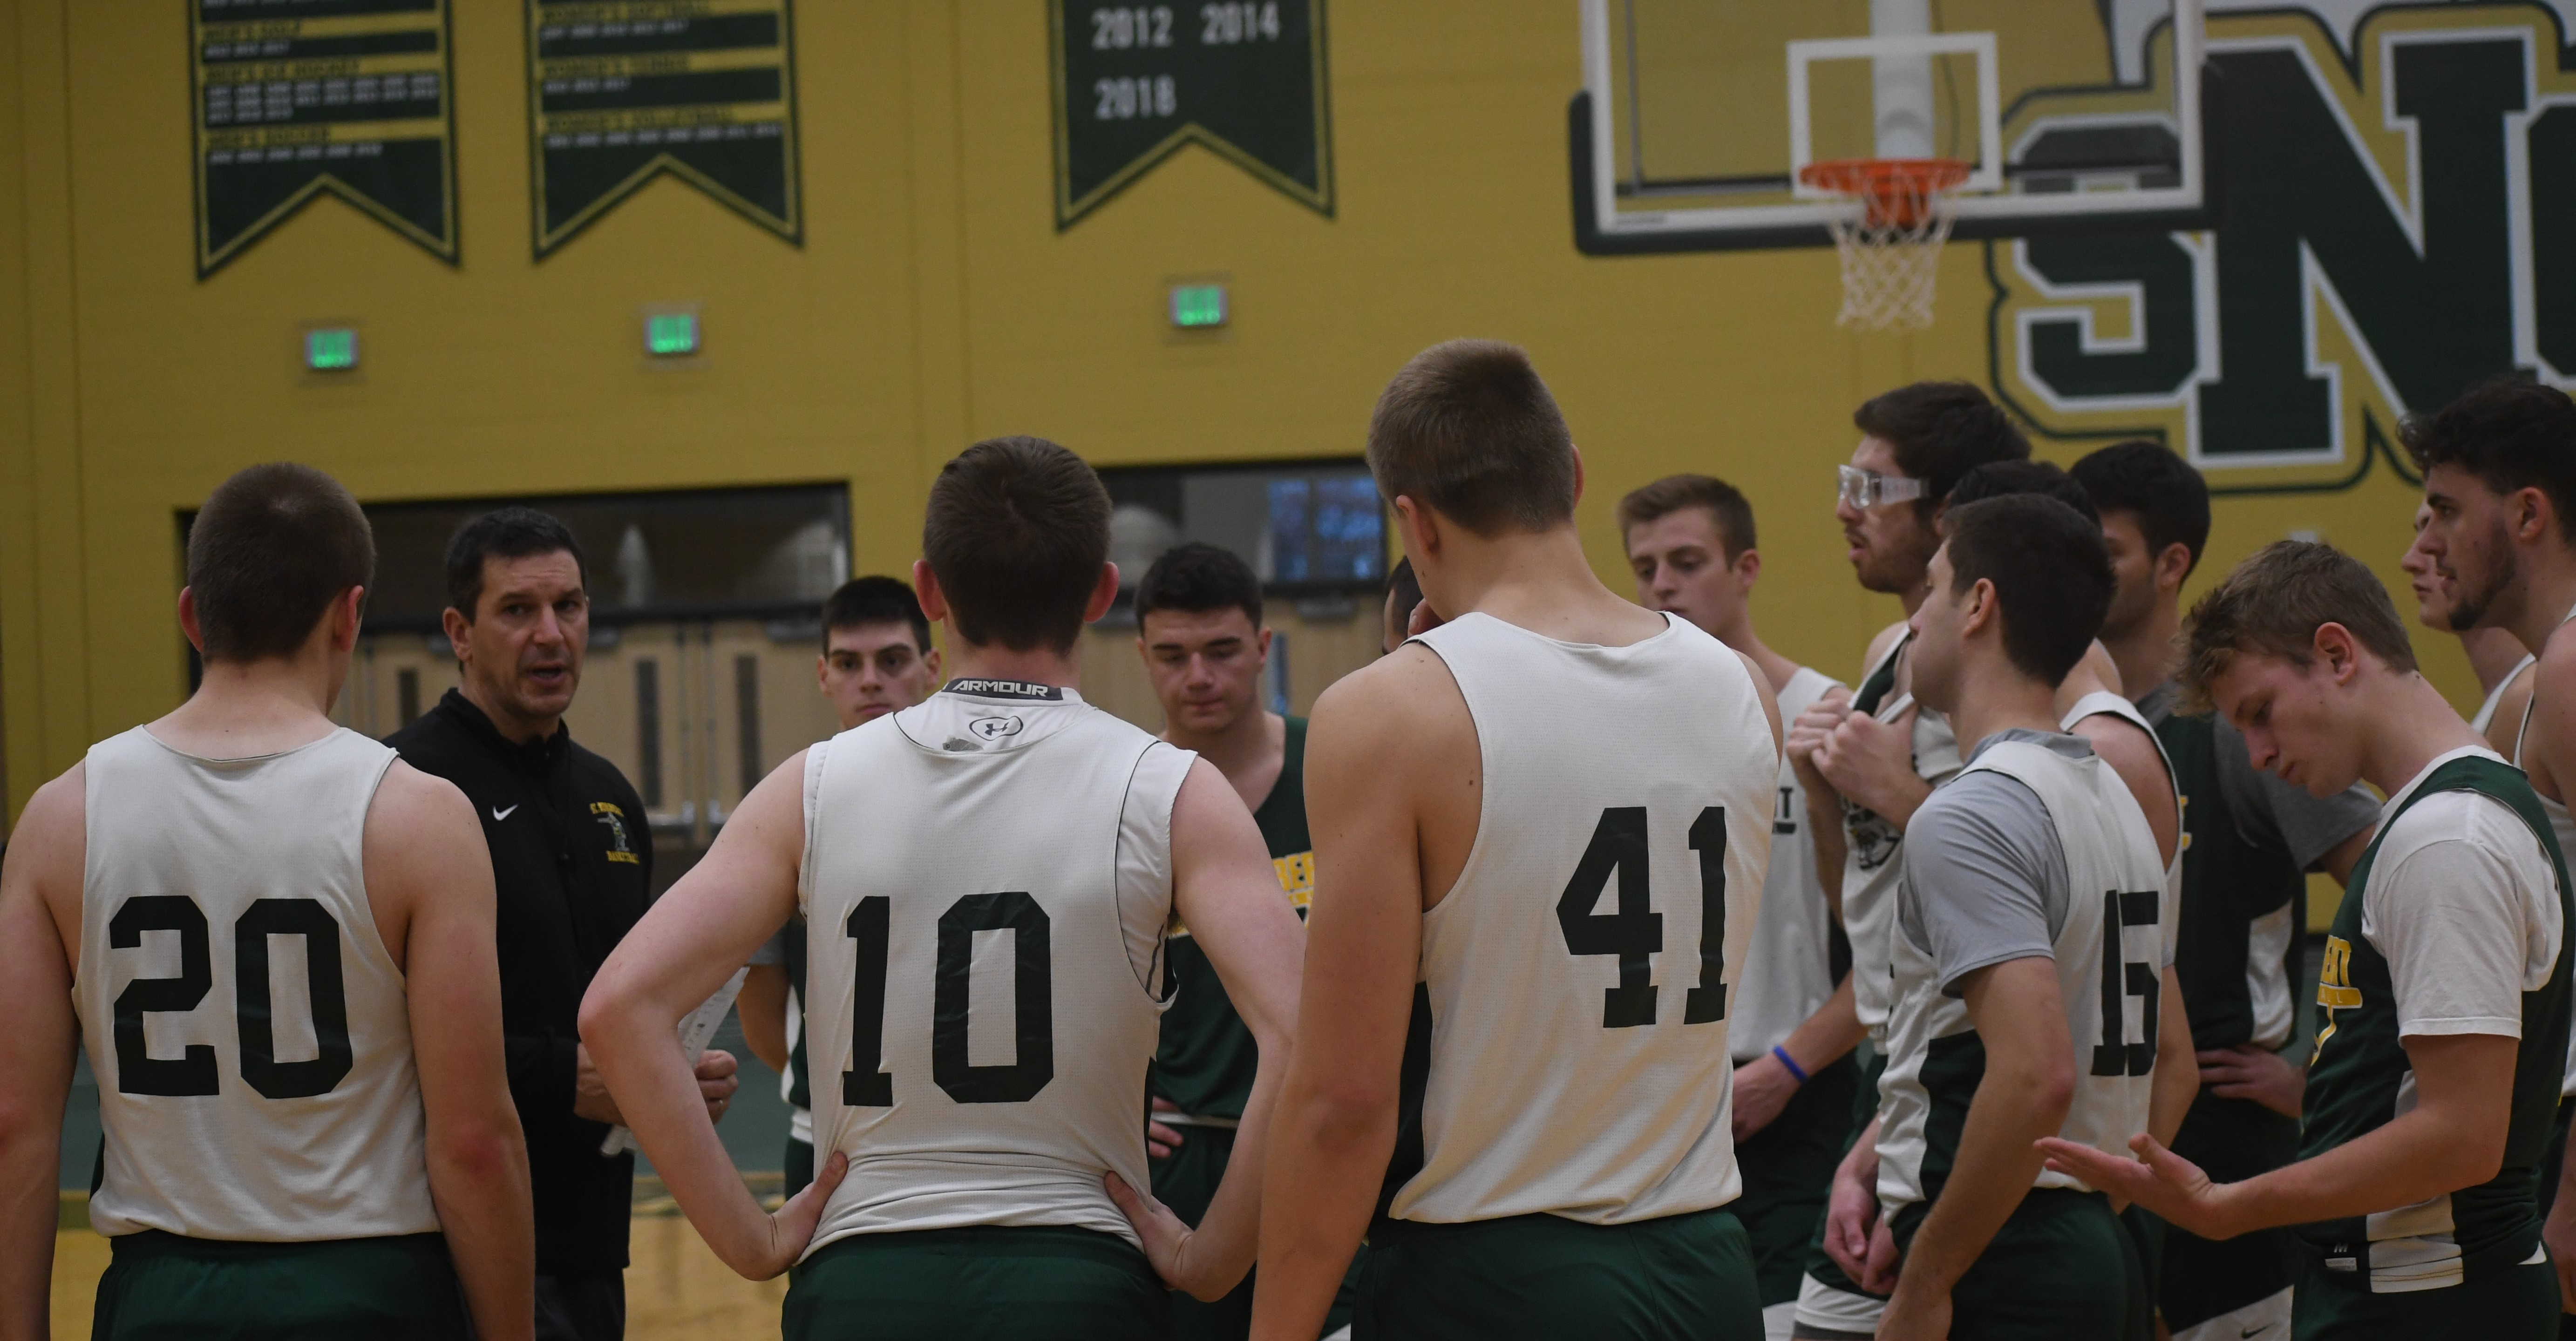 St. Norbert basketball looks to contend for conference championship